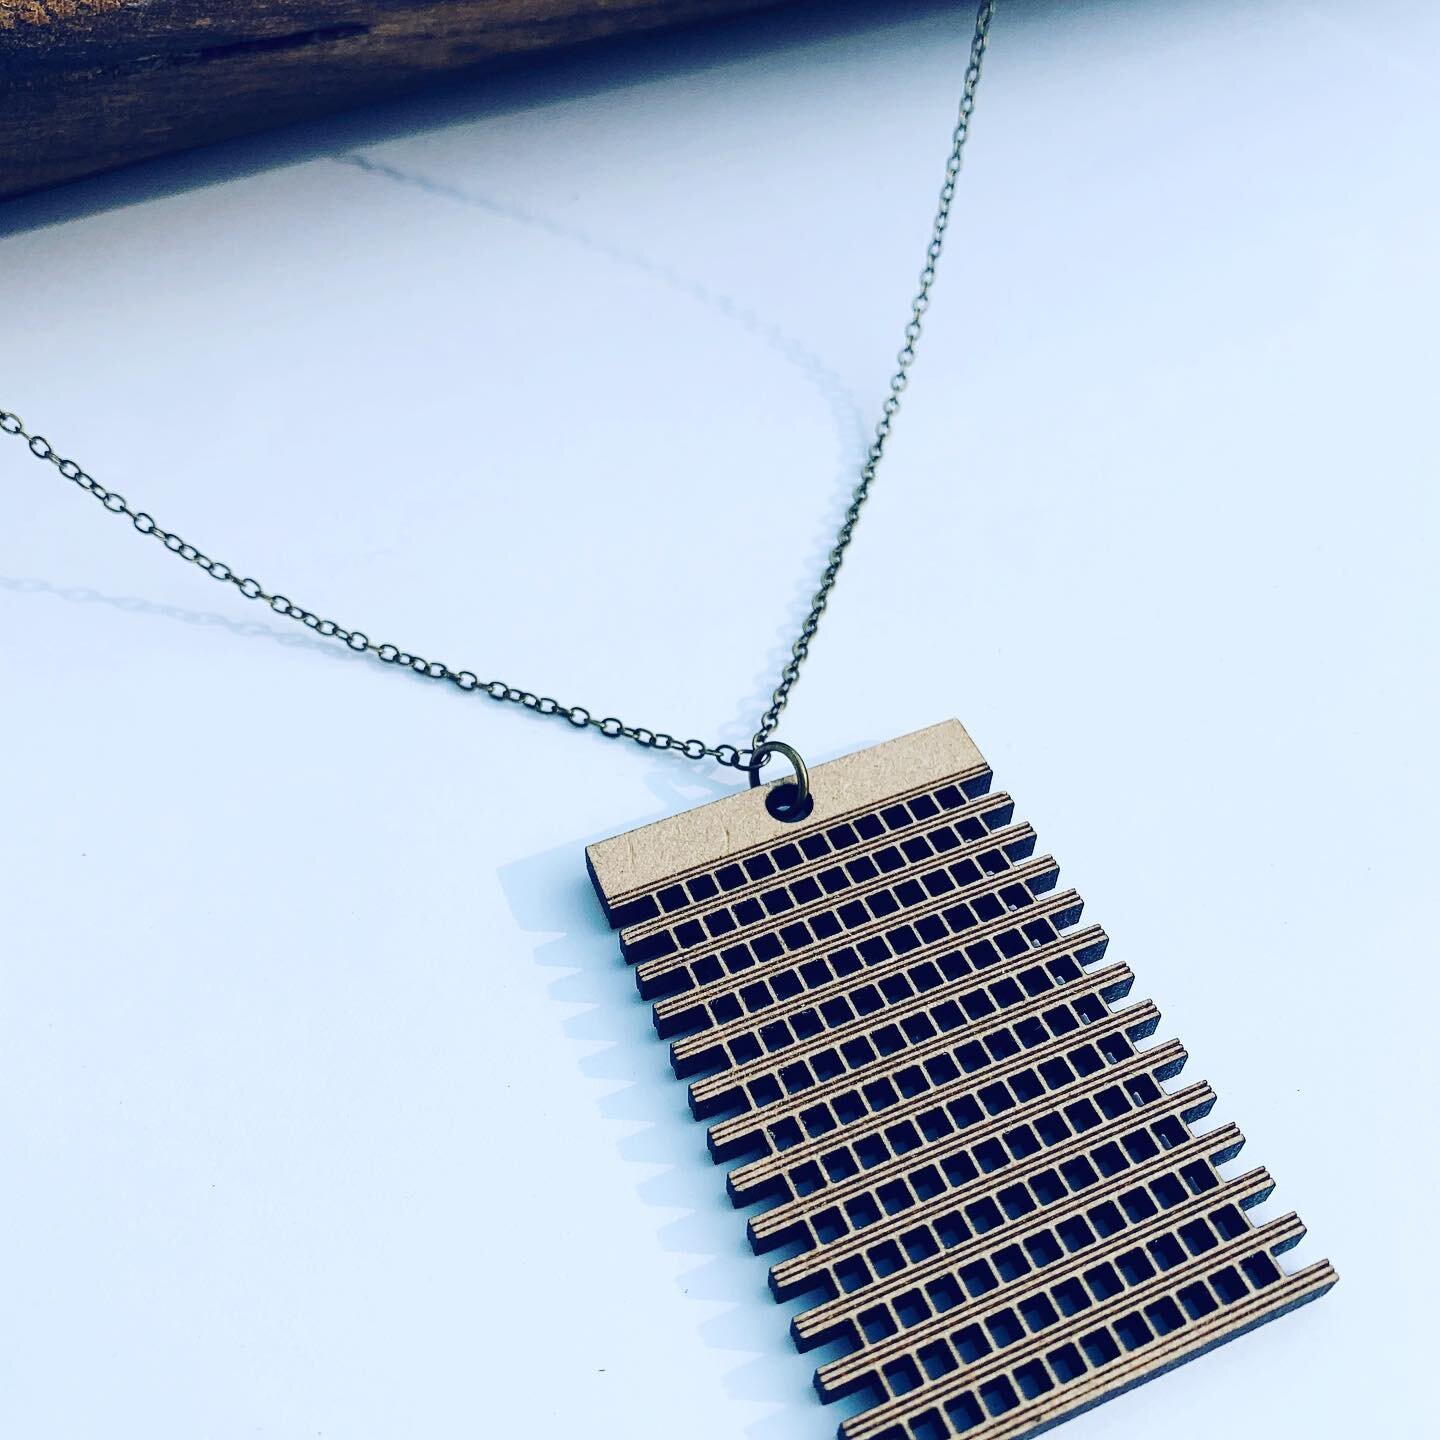 We are excited to introduce a collection inspired by the textures in architecture. #architextural Coming soon to @centraldesignshop #central #designiscentral #becentral  #getcentral &bull;
&bull;
&bull;
&bull;
&bull;
#lasercutjewelry #accessories #fa